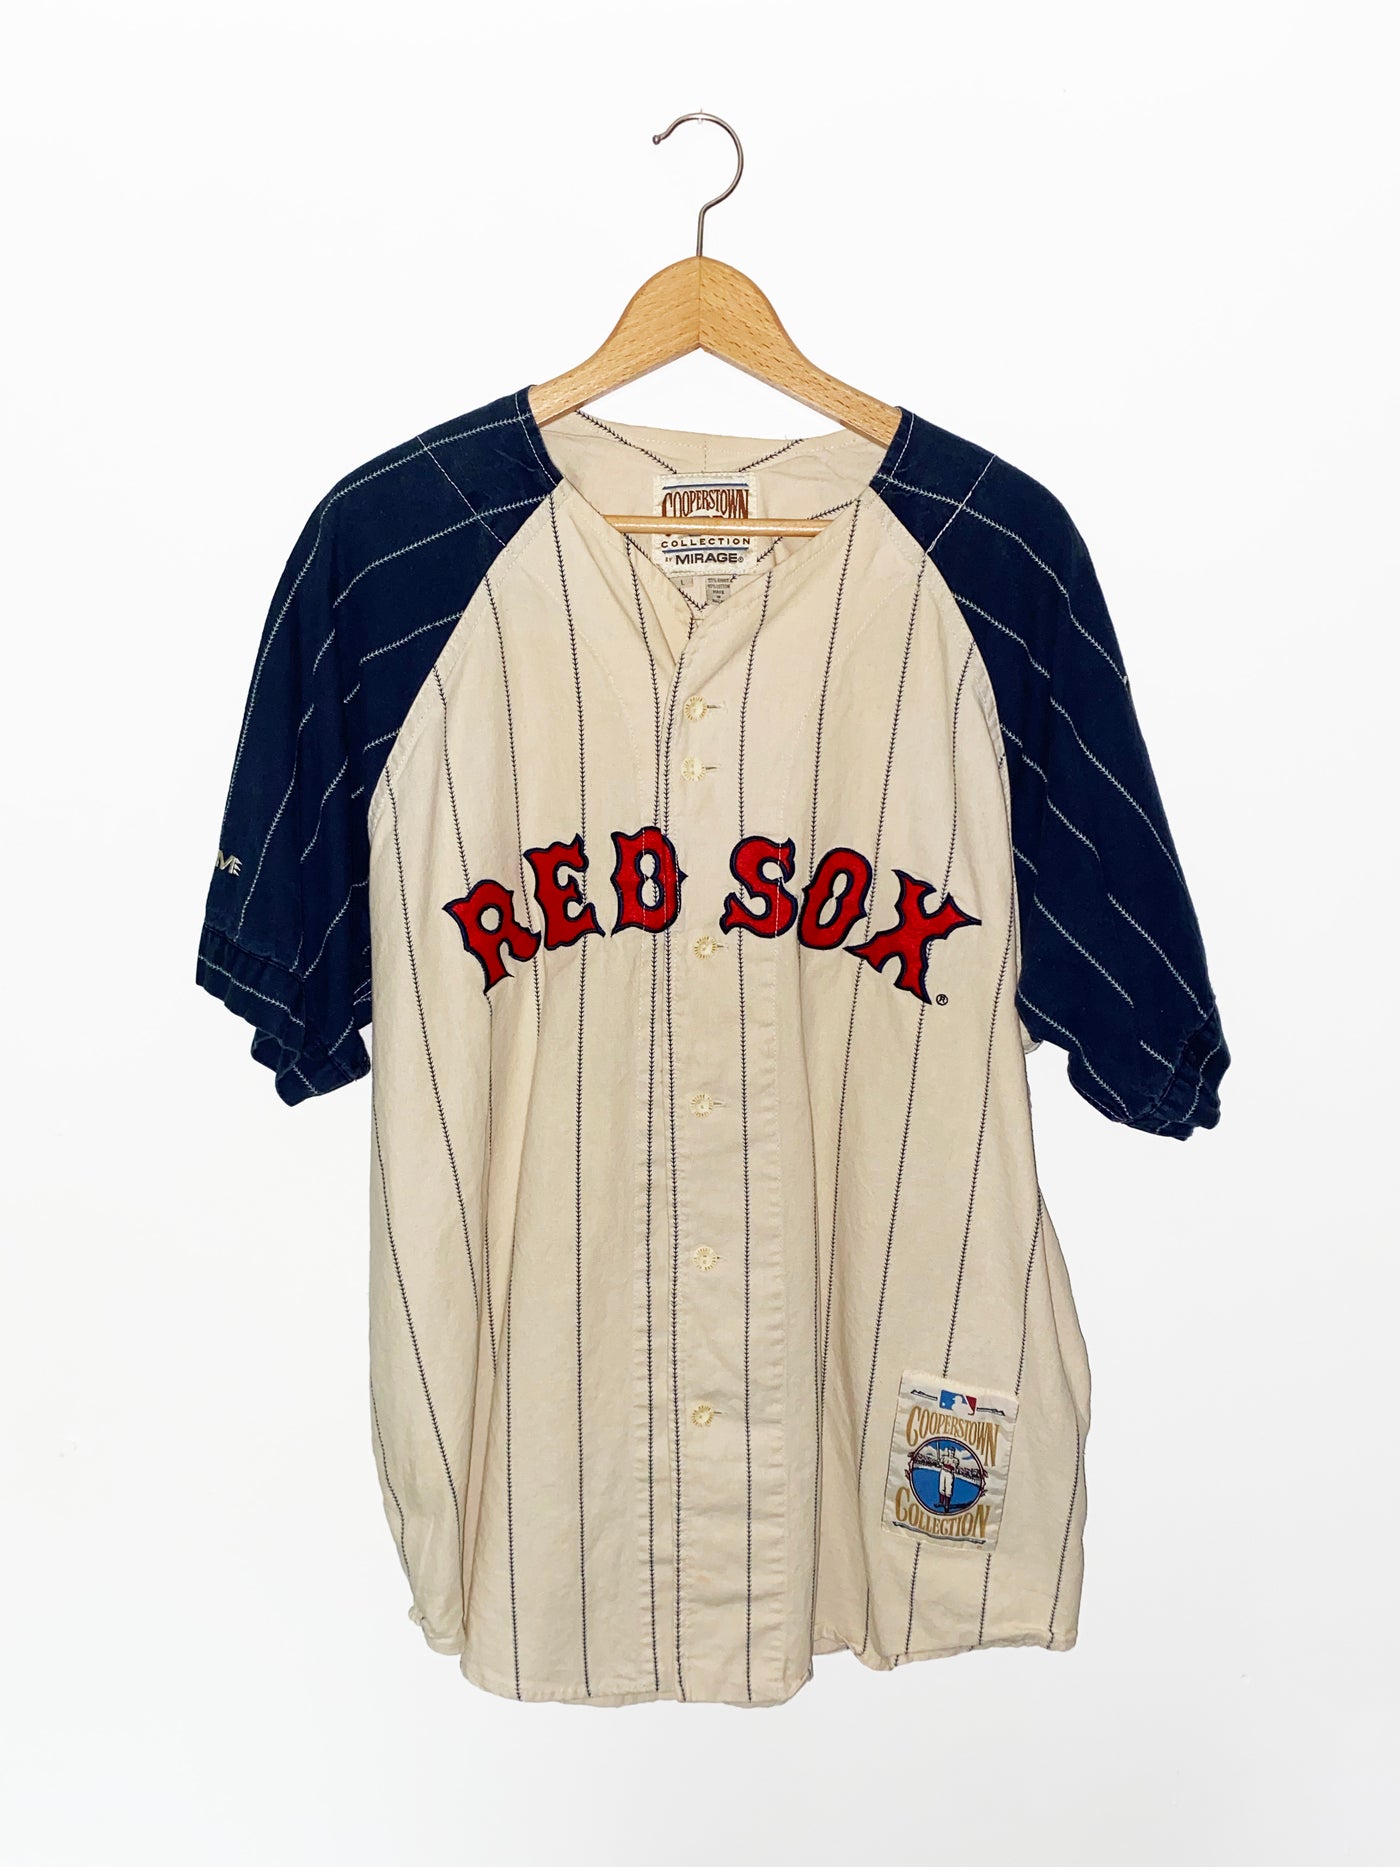 VTG Cooperstown Collection Ted Williams Red Sox jersey by Mirage